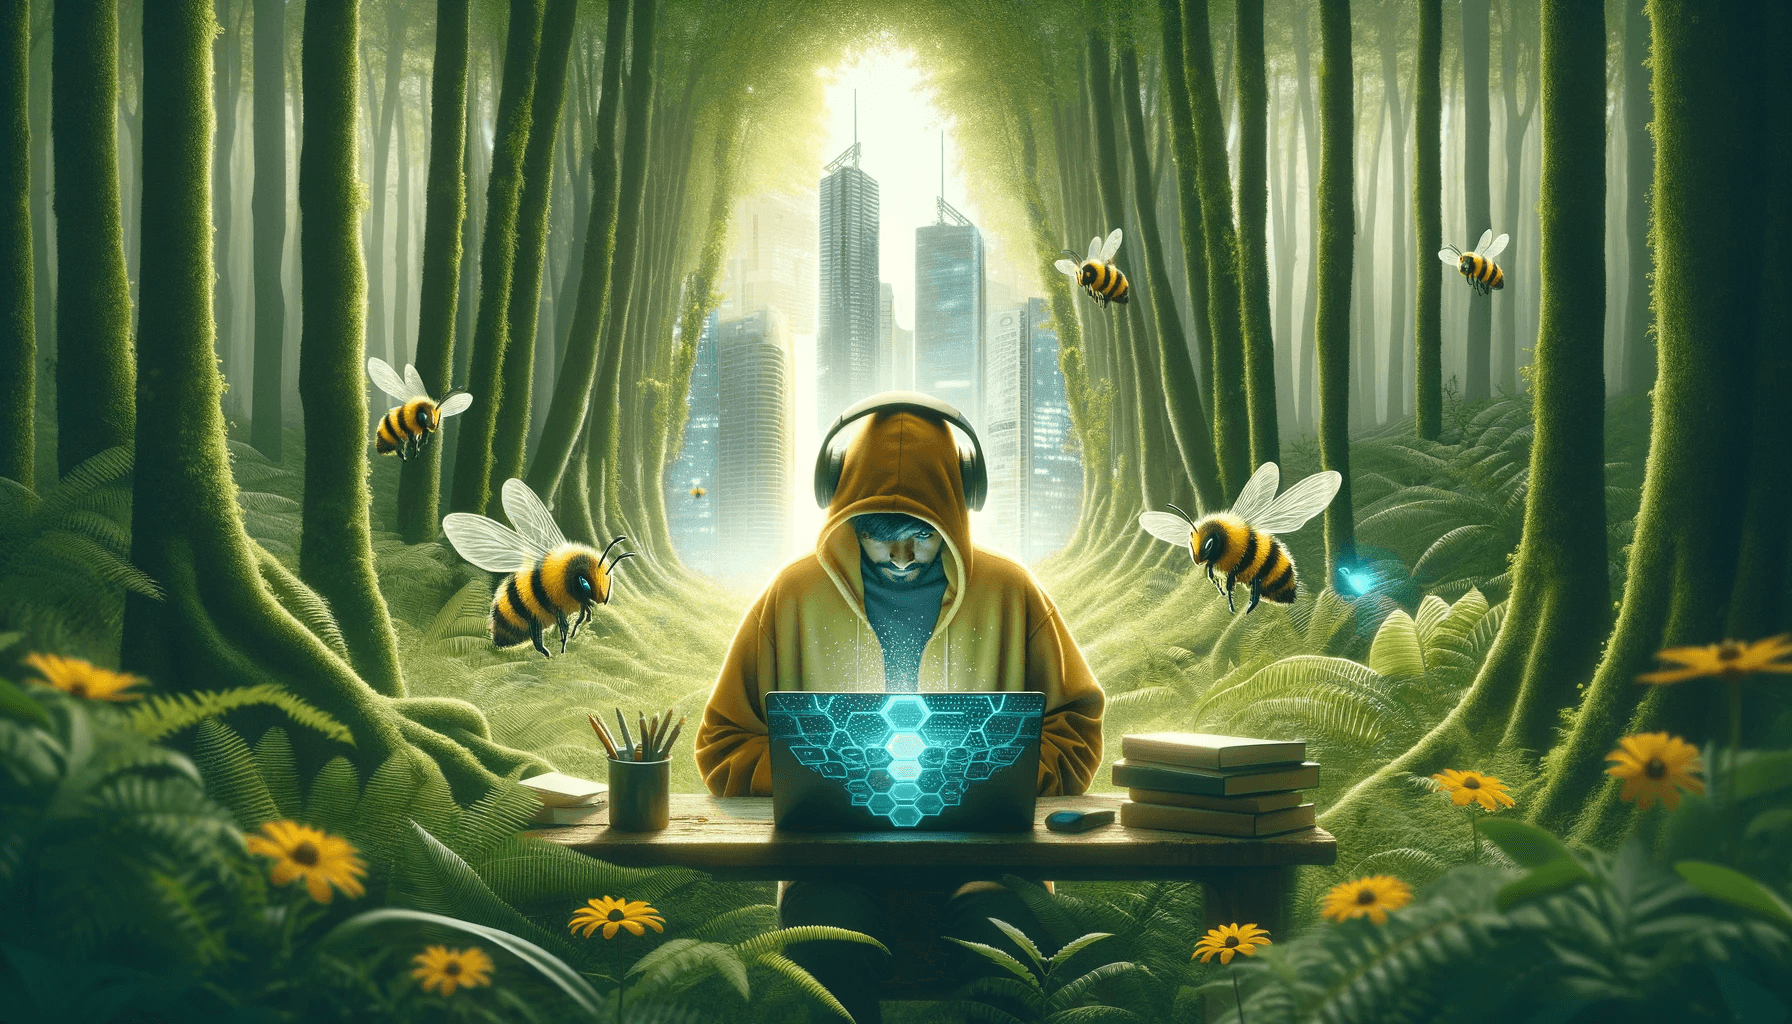 Man in hoodie wearing headphones in a mystical forest. Working on a laptop with bees around him and a distant futuristic city visible through the trees